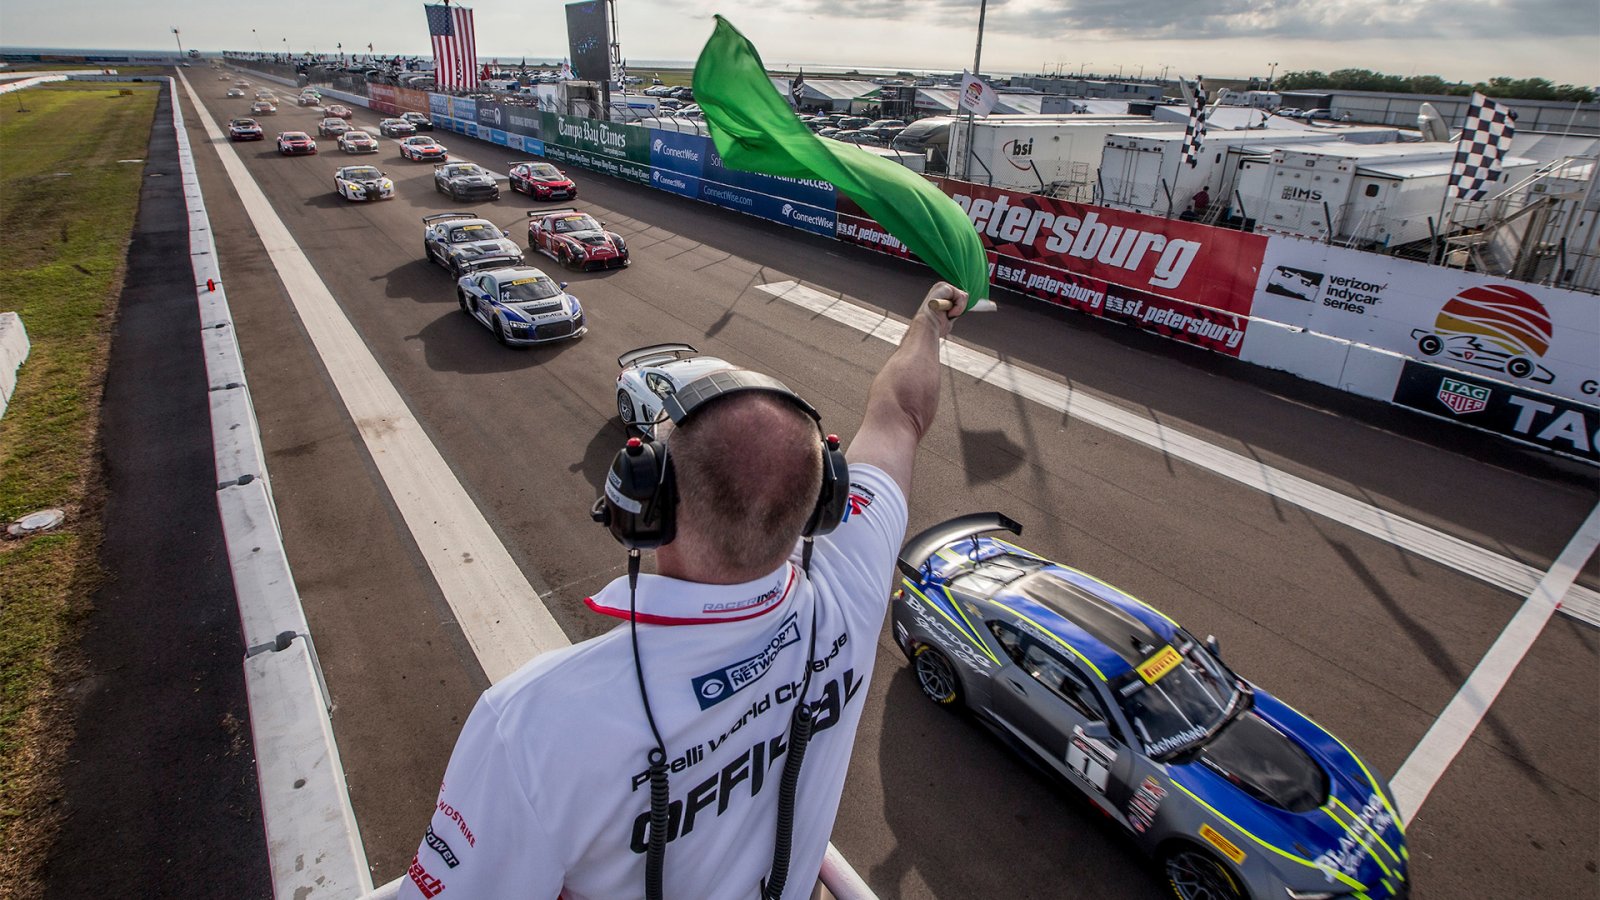 Pirelli GT4 America Sprint Set for Kickoff on Streets of St. Petersburg